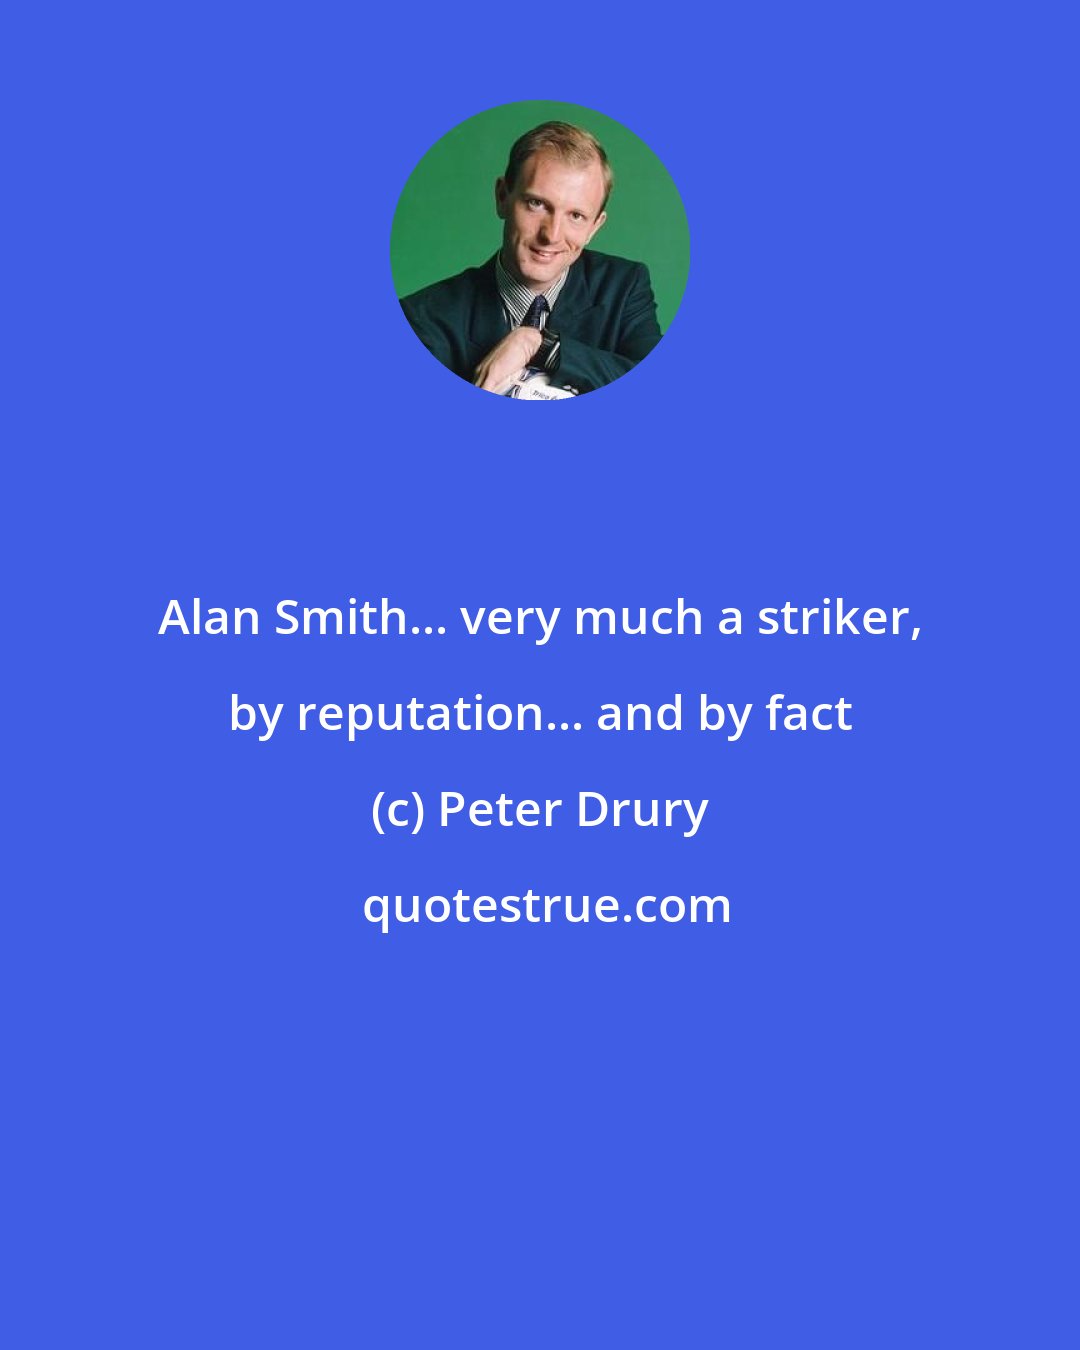 Peter Drury: Alan Smith... very much a striker, by reputation... and by fact